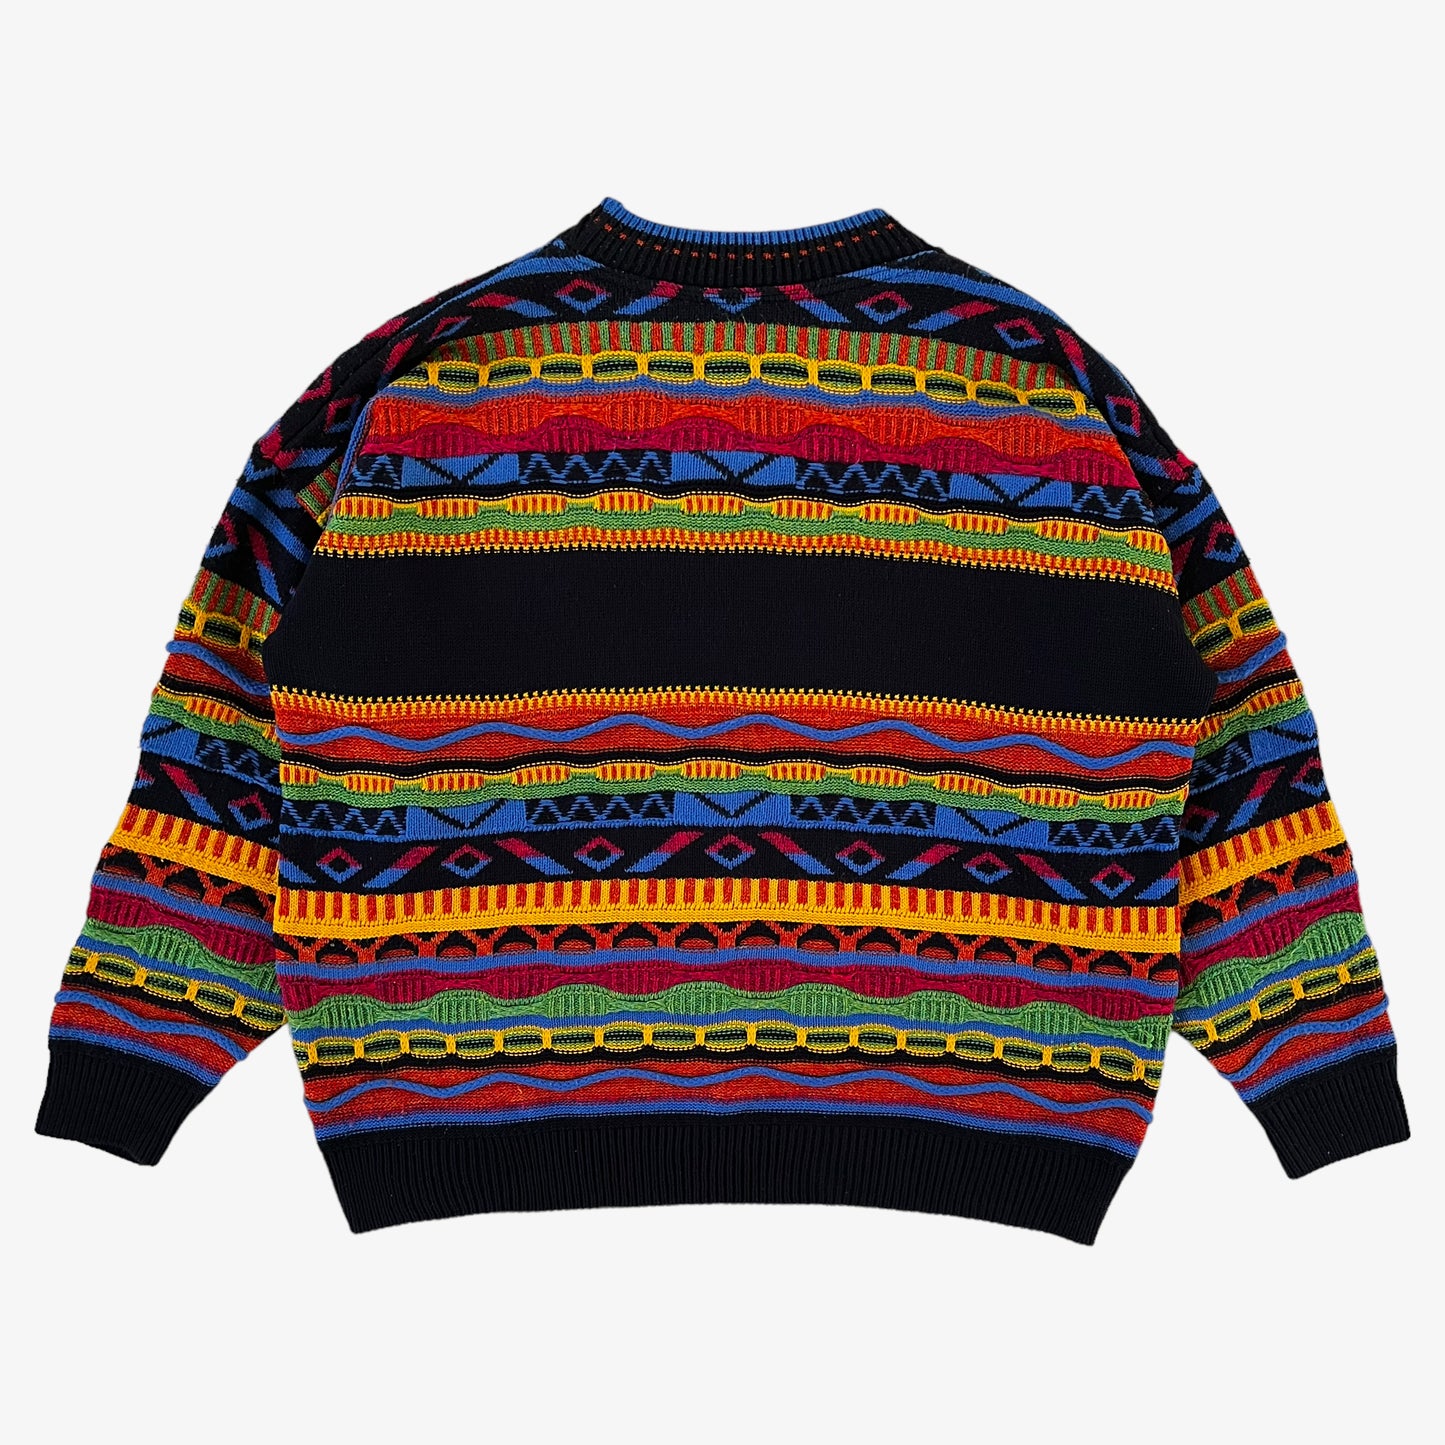 Vintage 90s The Sweater Shop 3D Textured Colourful Knitted Jumper Back - Casspios Dream